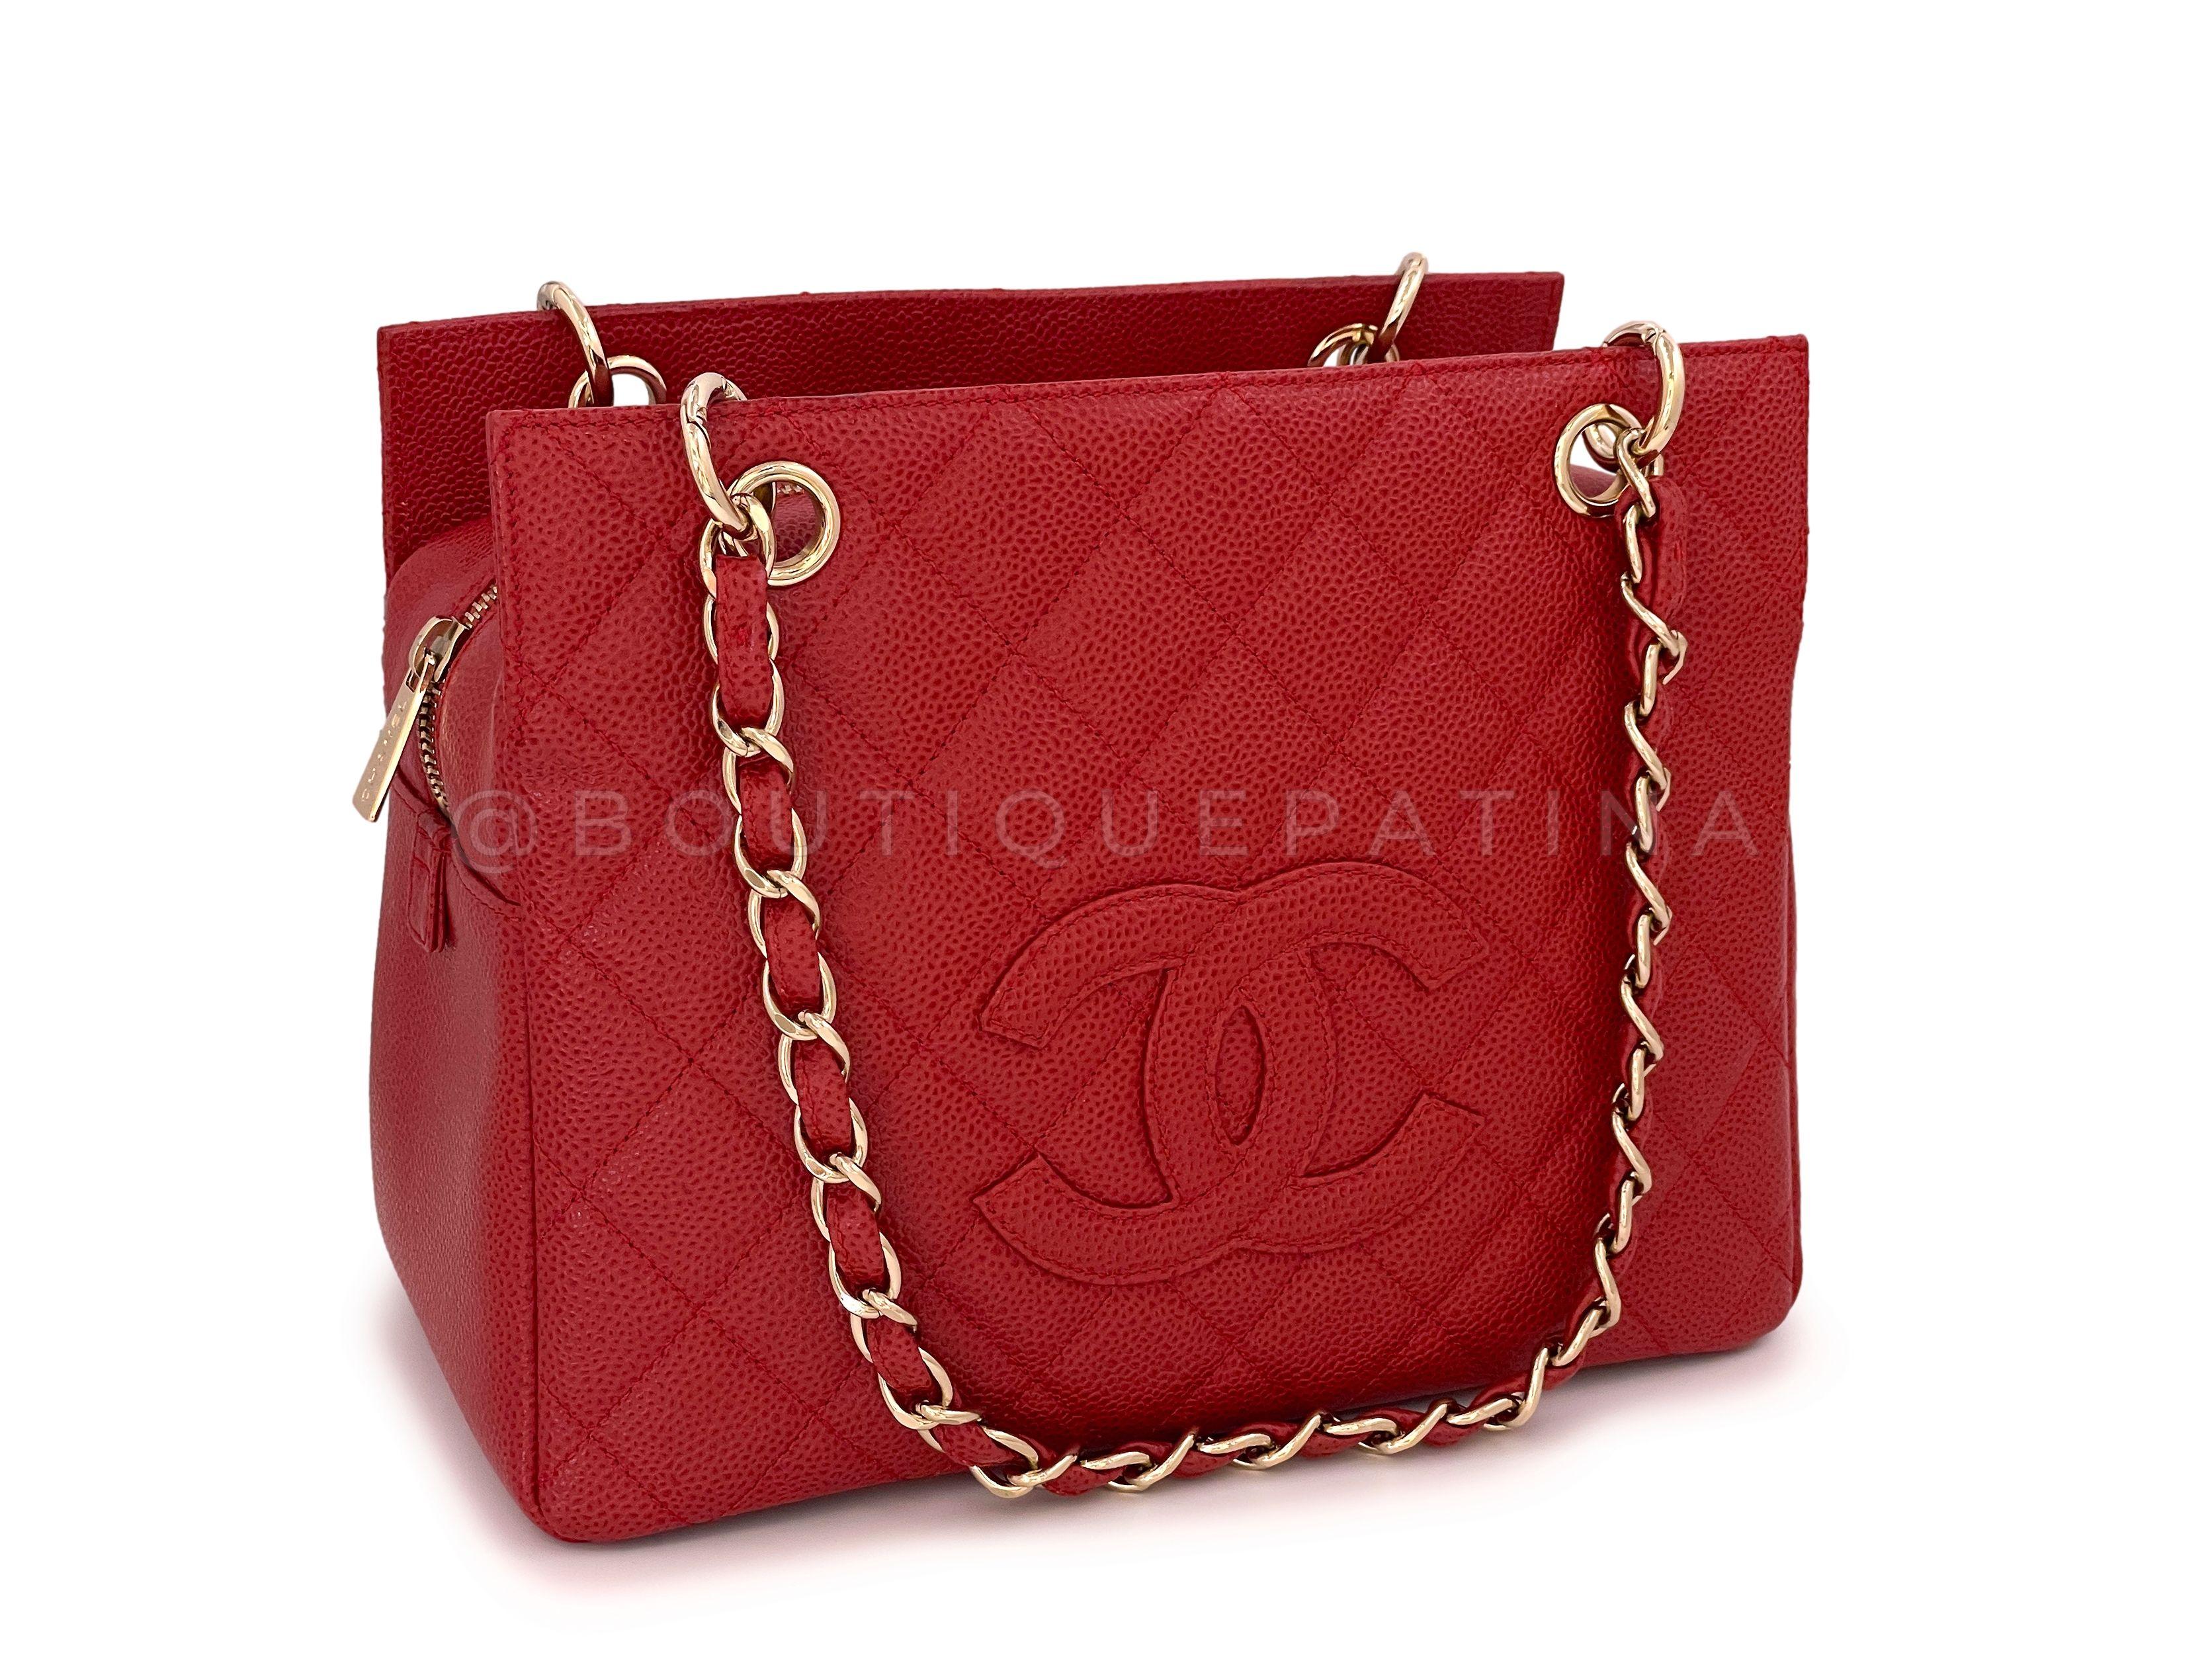 Store SKU: 65707
The Chanel Timeless Shopper Tote is another timeless classic - a smaller version of the very popular Grand Shopper Tote (GST). We love the size on this bag, it's a solid 25cm tote - one of the most popular sizes of totes today.